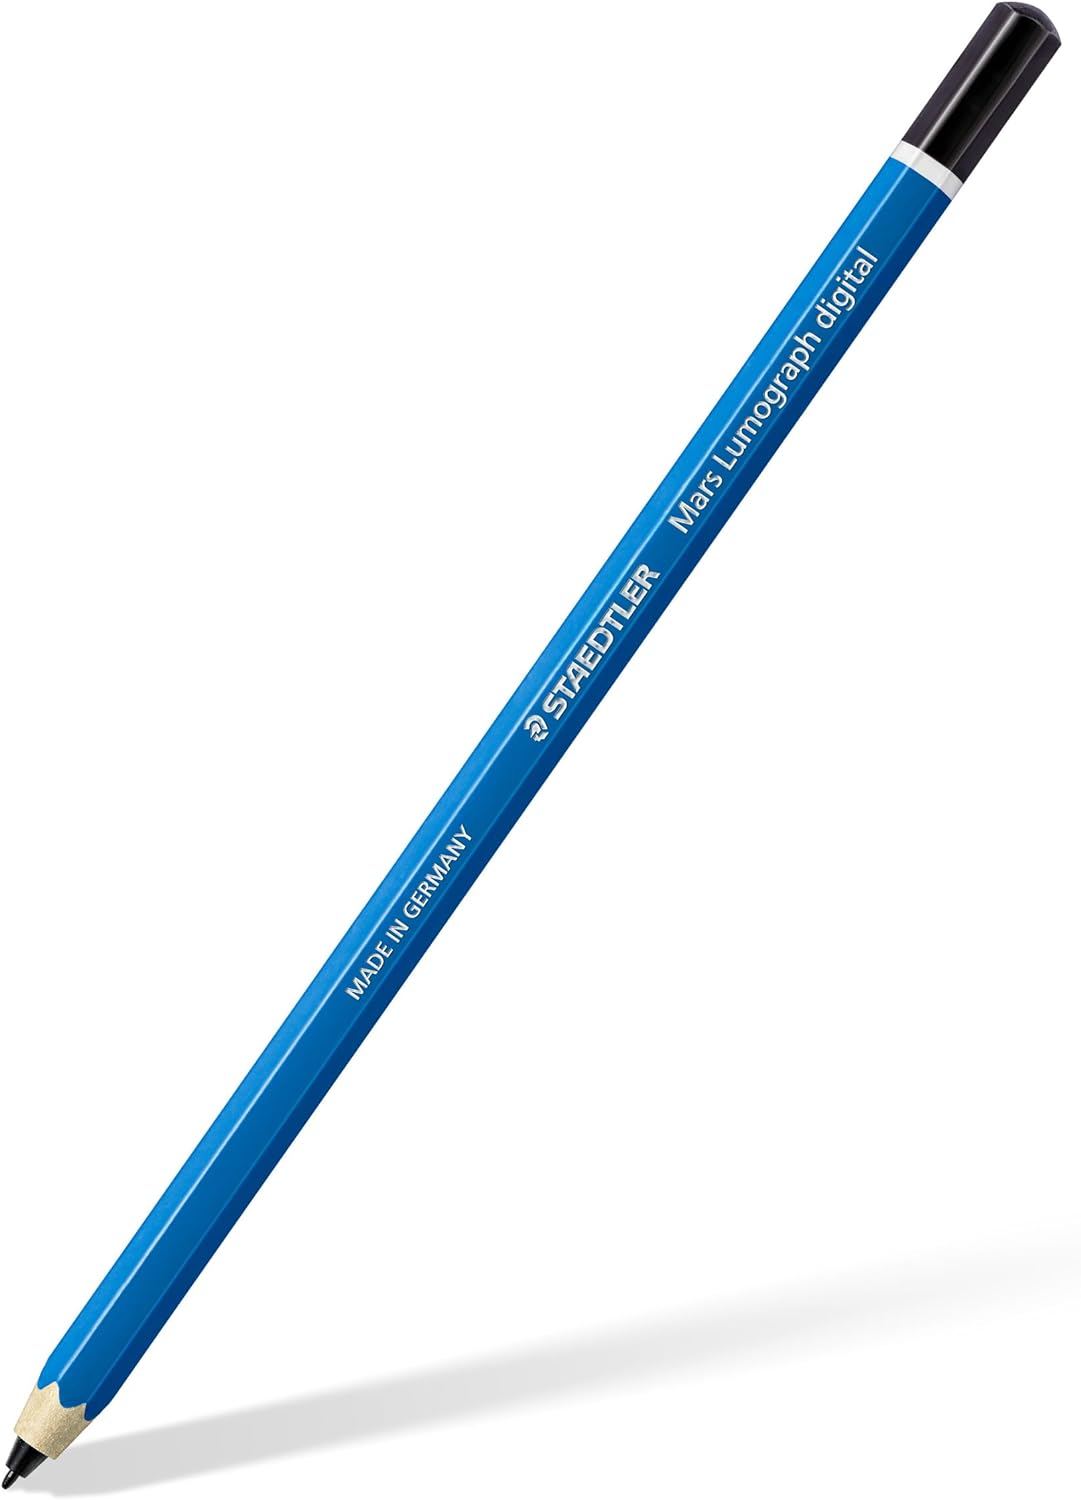 Staedtler Mars Lumograph Digital Classic 180 22. EMR, capacitive stylus for digital writing and drawing on EMR